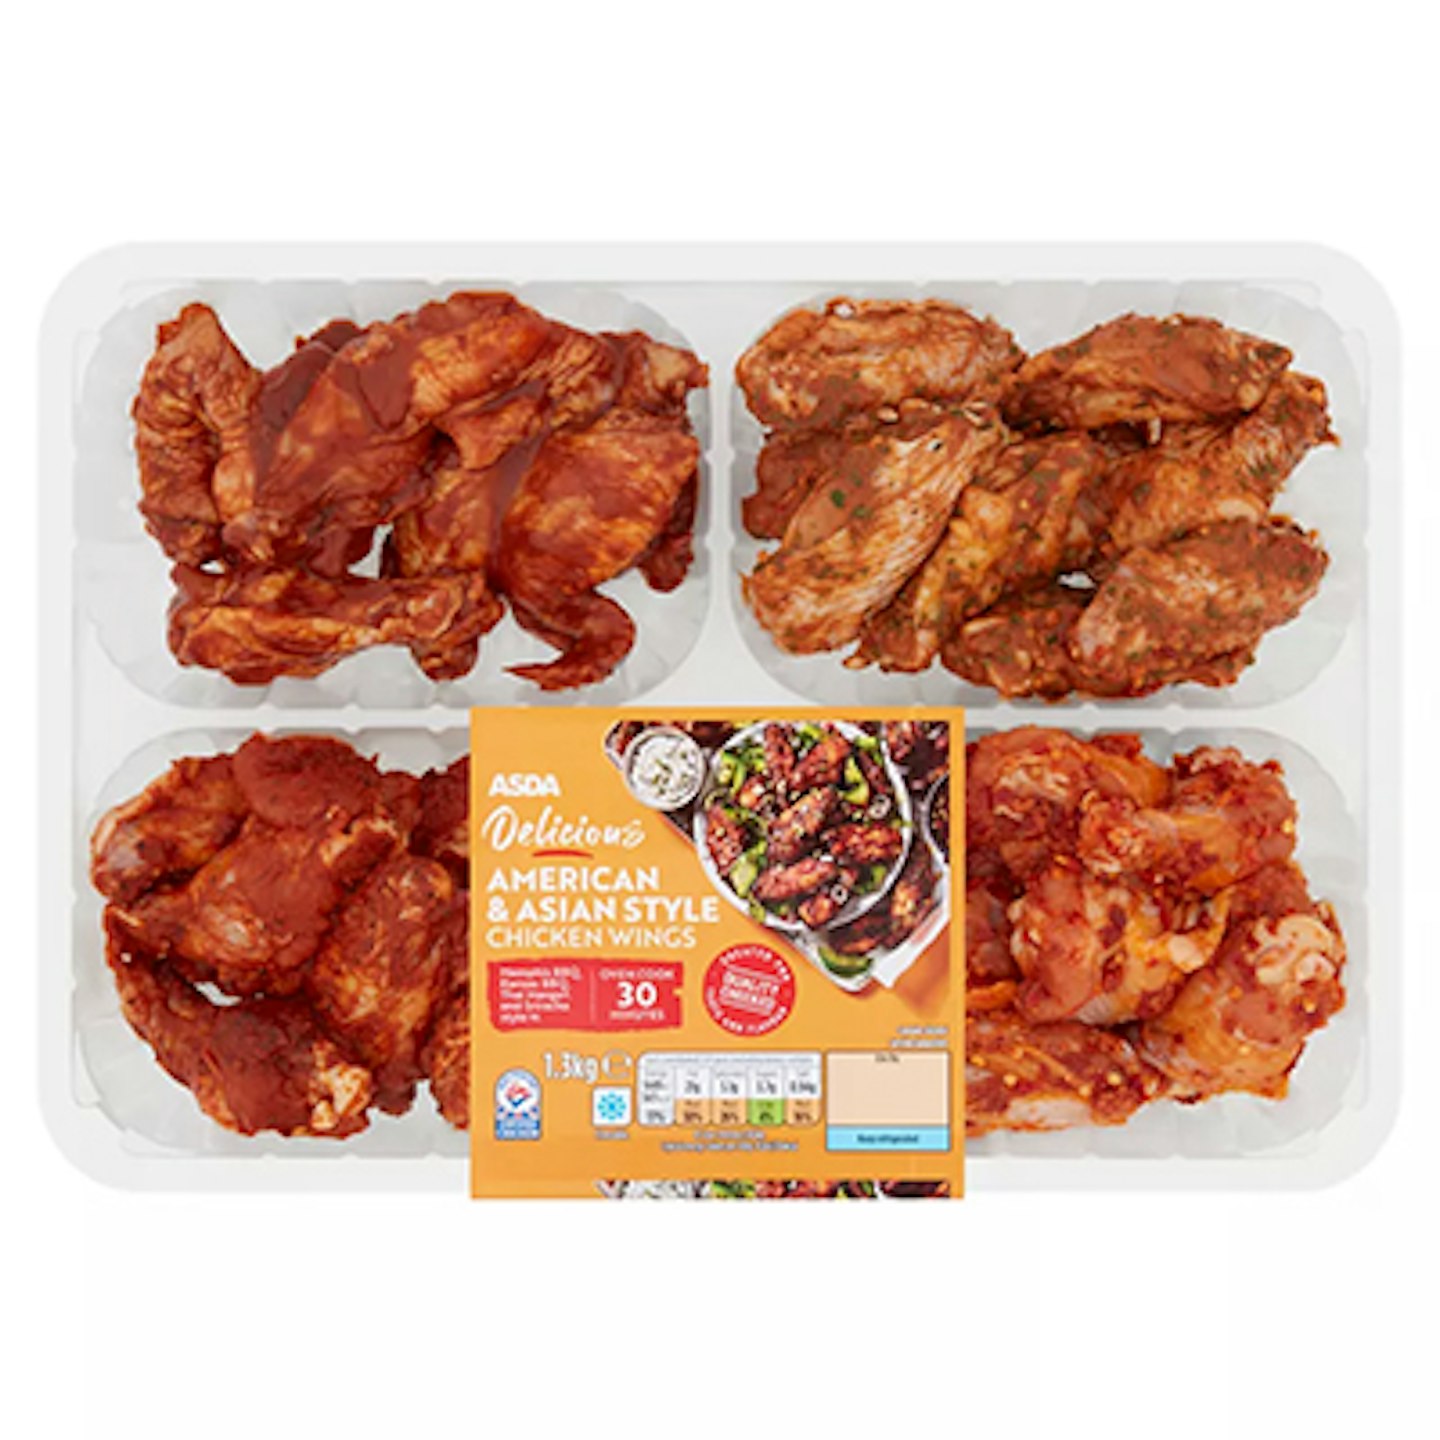 ASDA Delicious American & Asian Style Chicken Wings